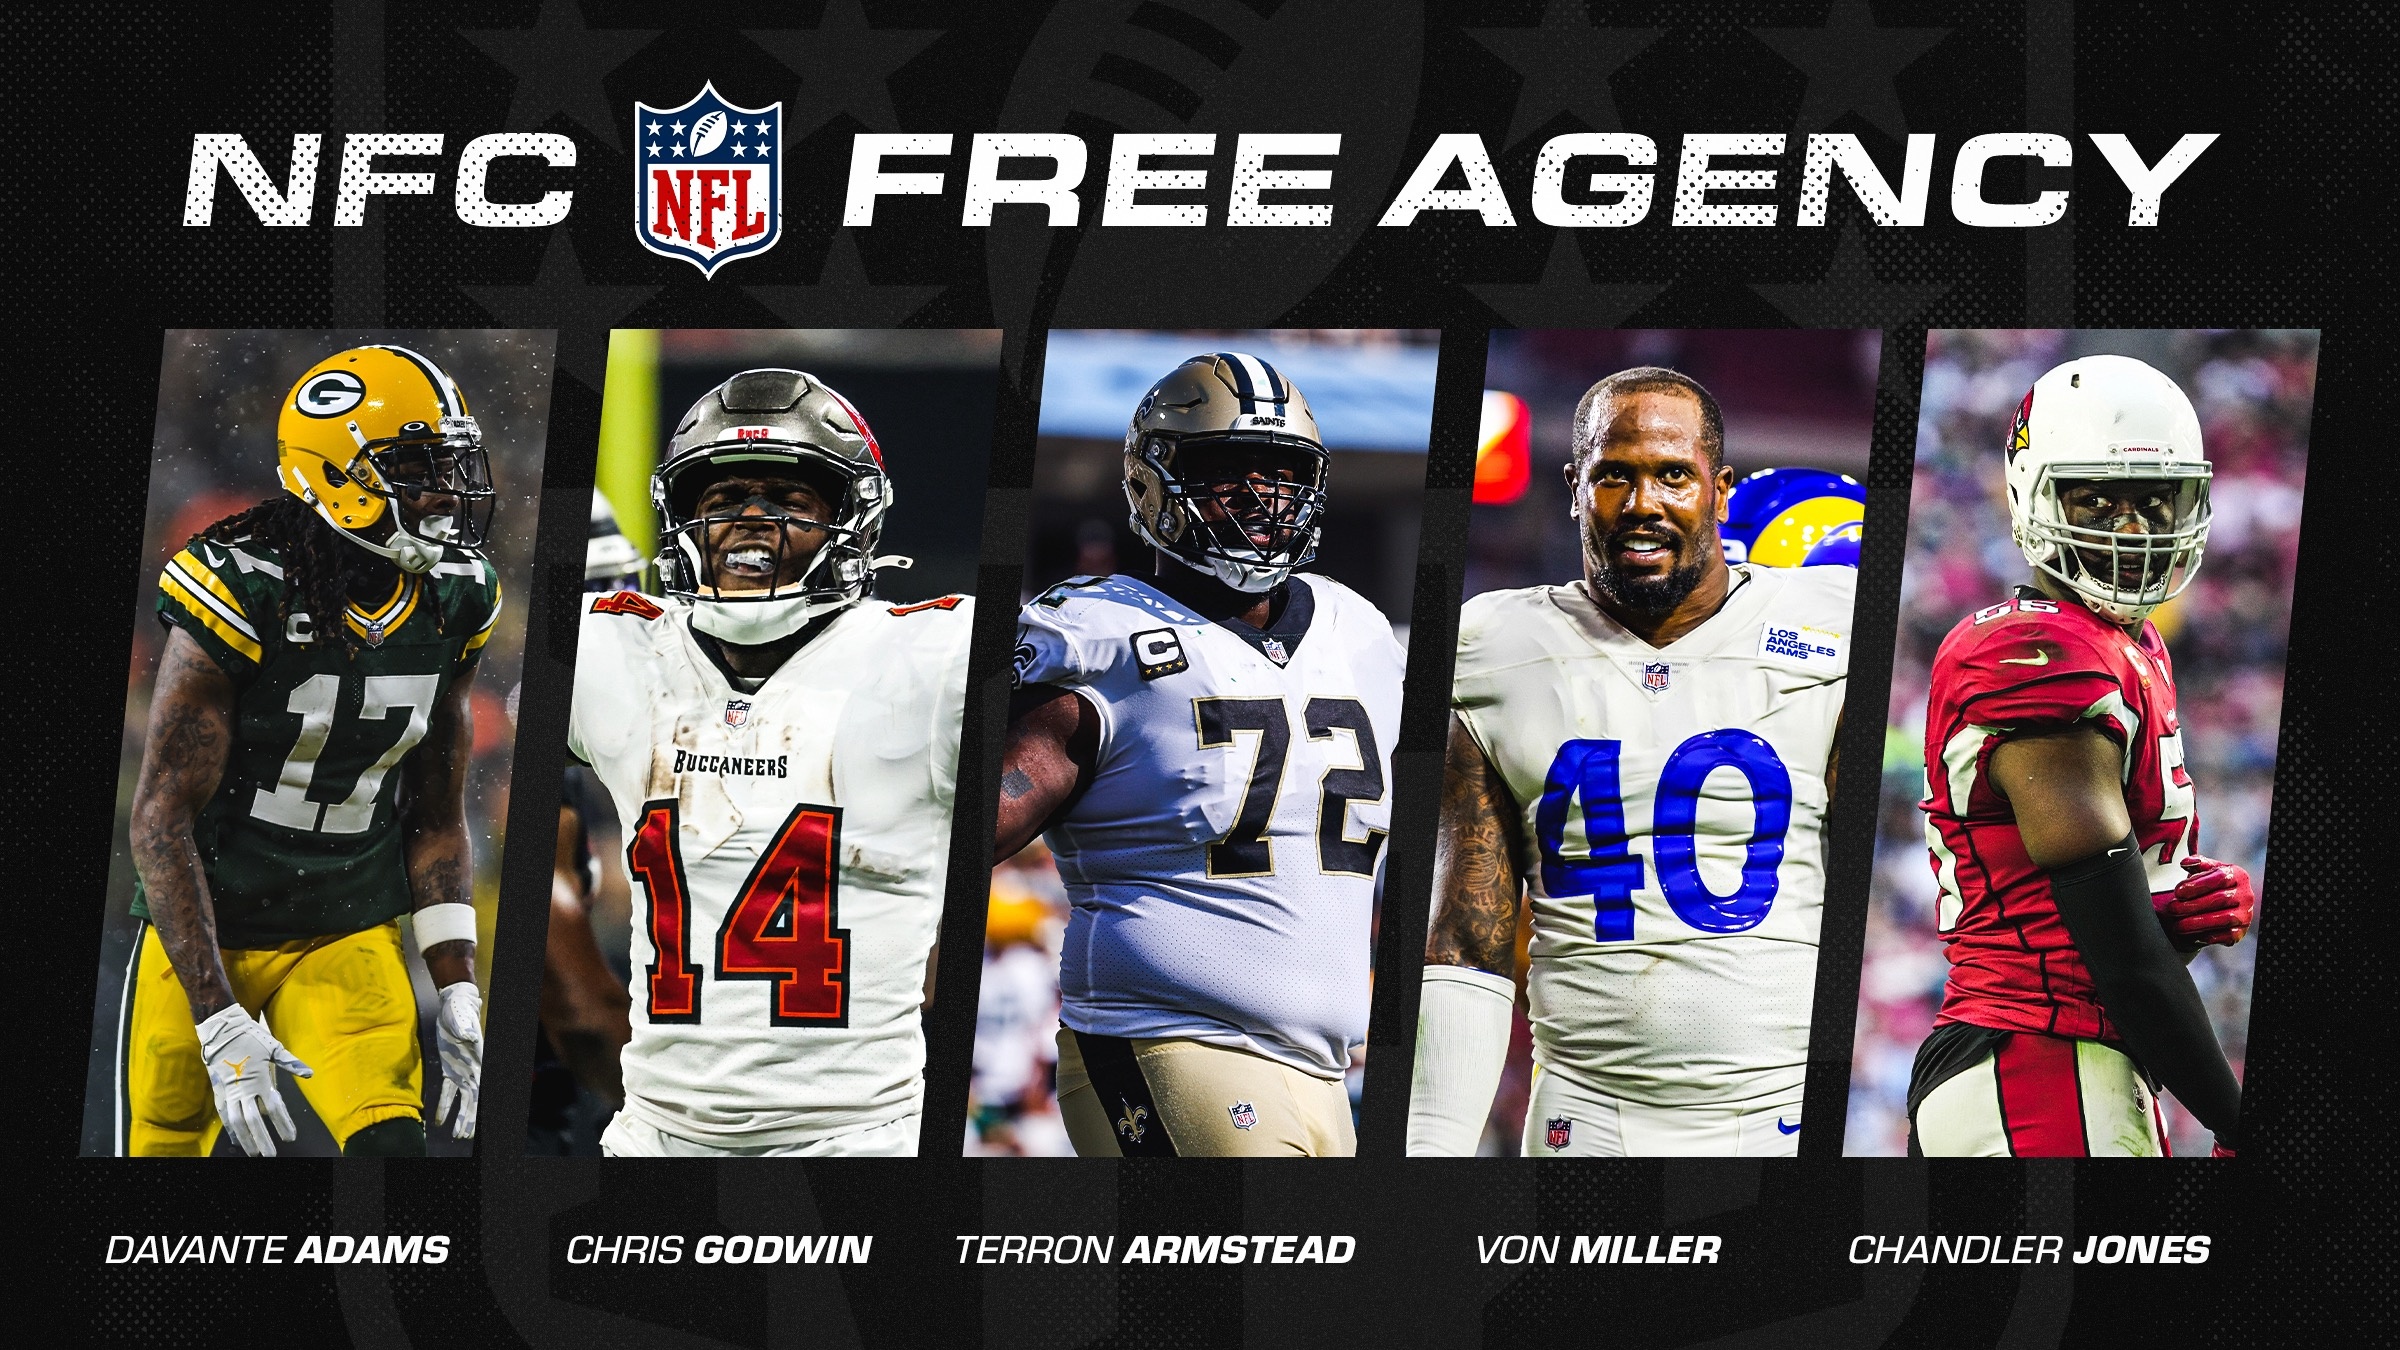 The name game when it comes to NFC free agents